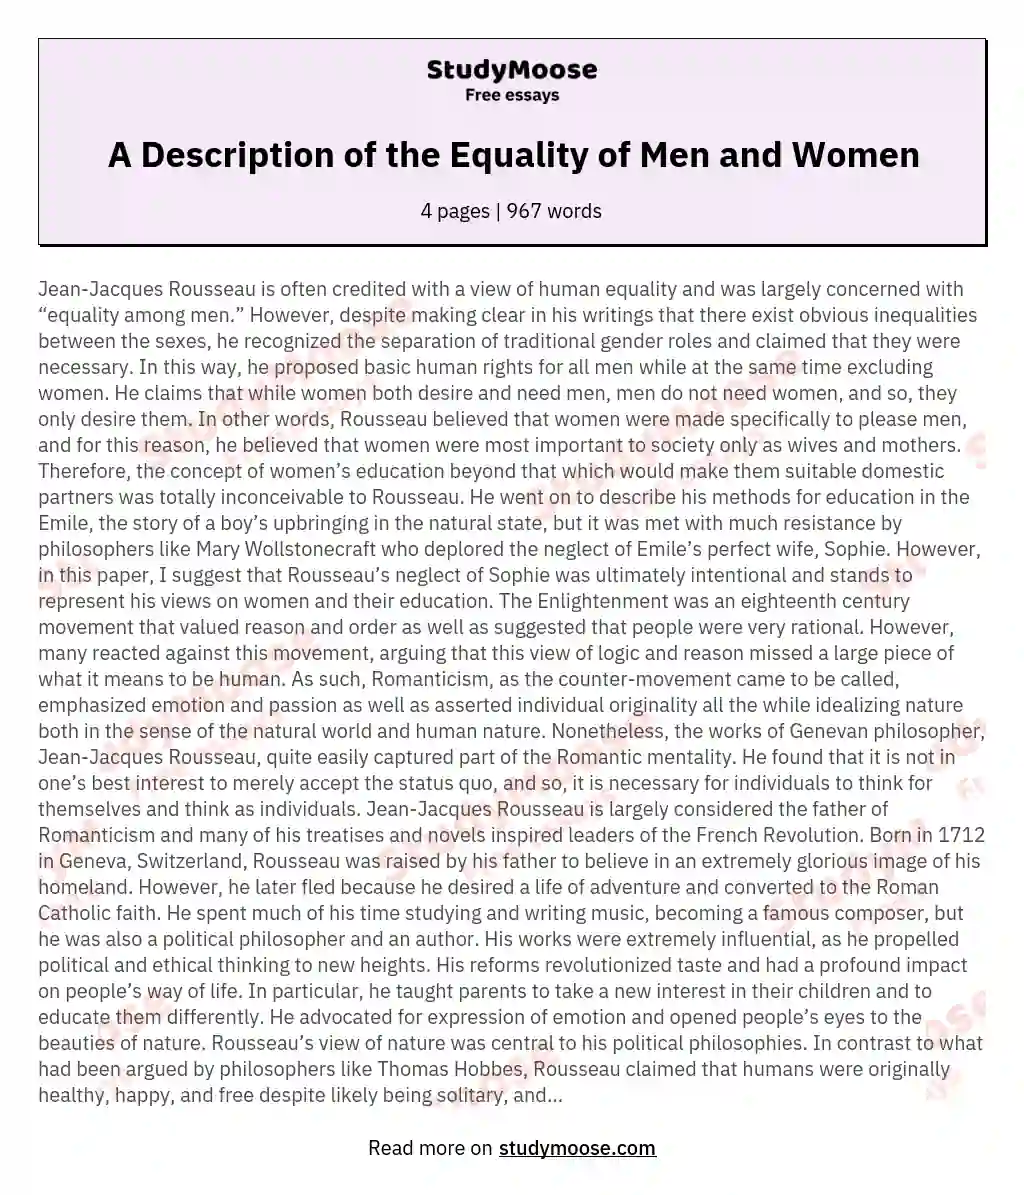 A Description of the Equality of Men and Women